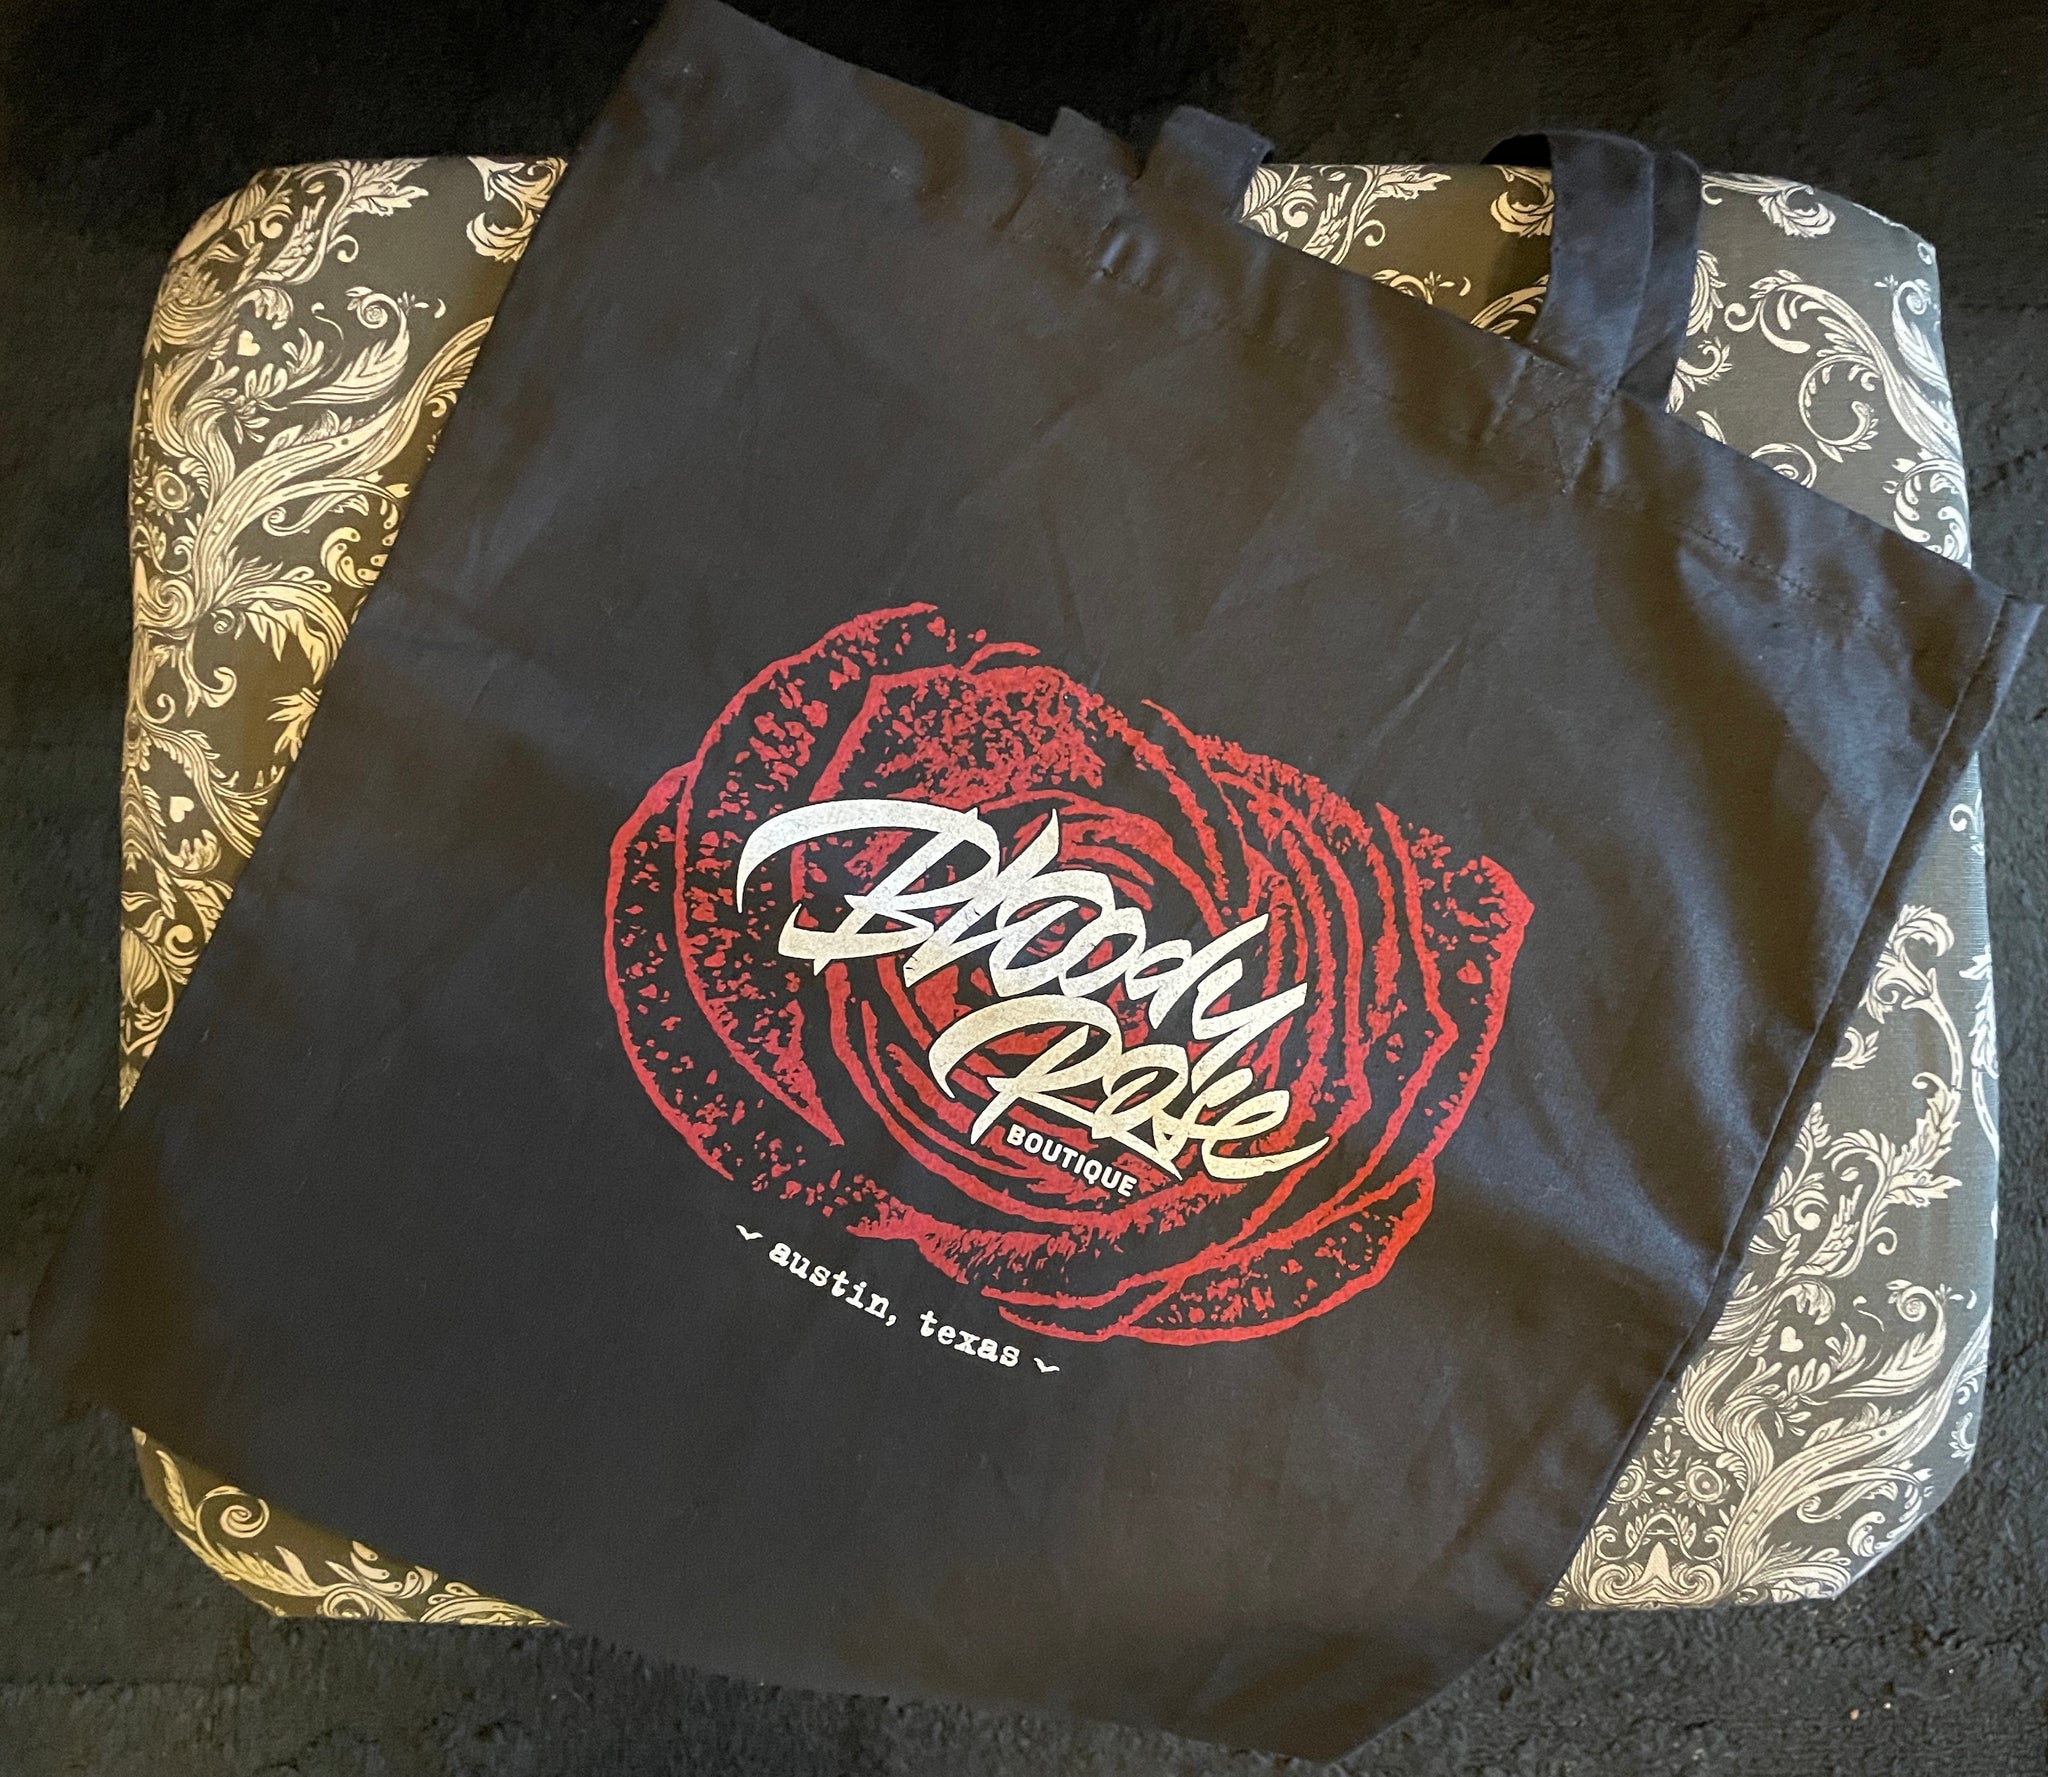 Bloody Rose Boutique Tote Bag